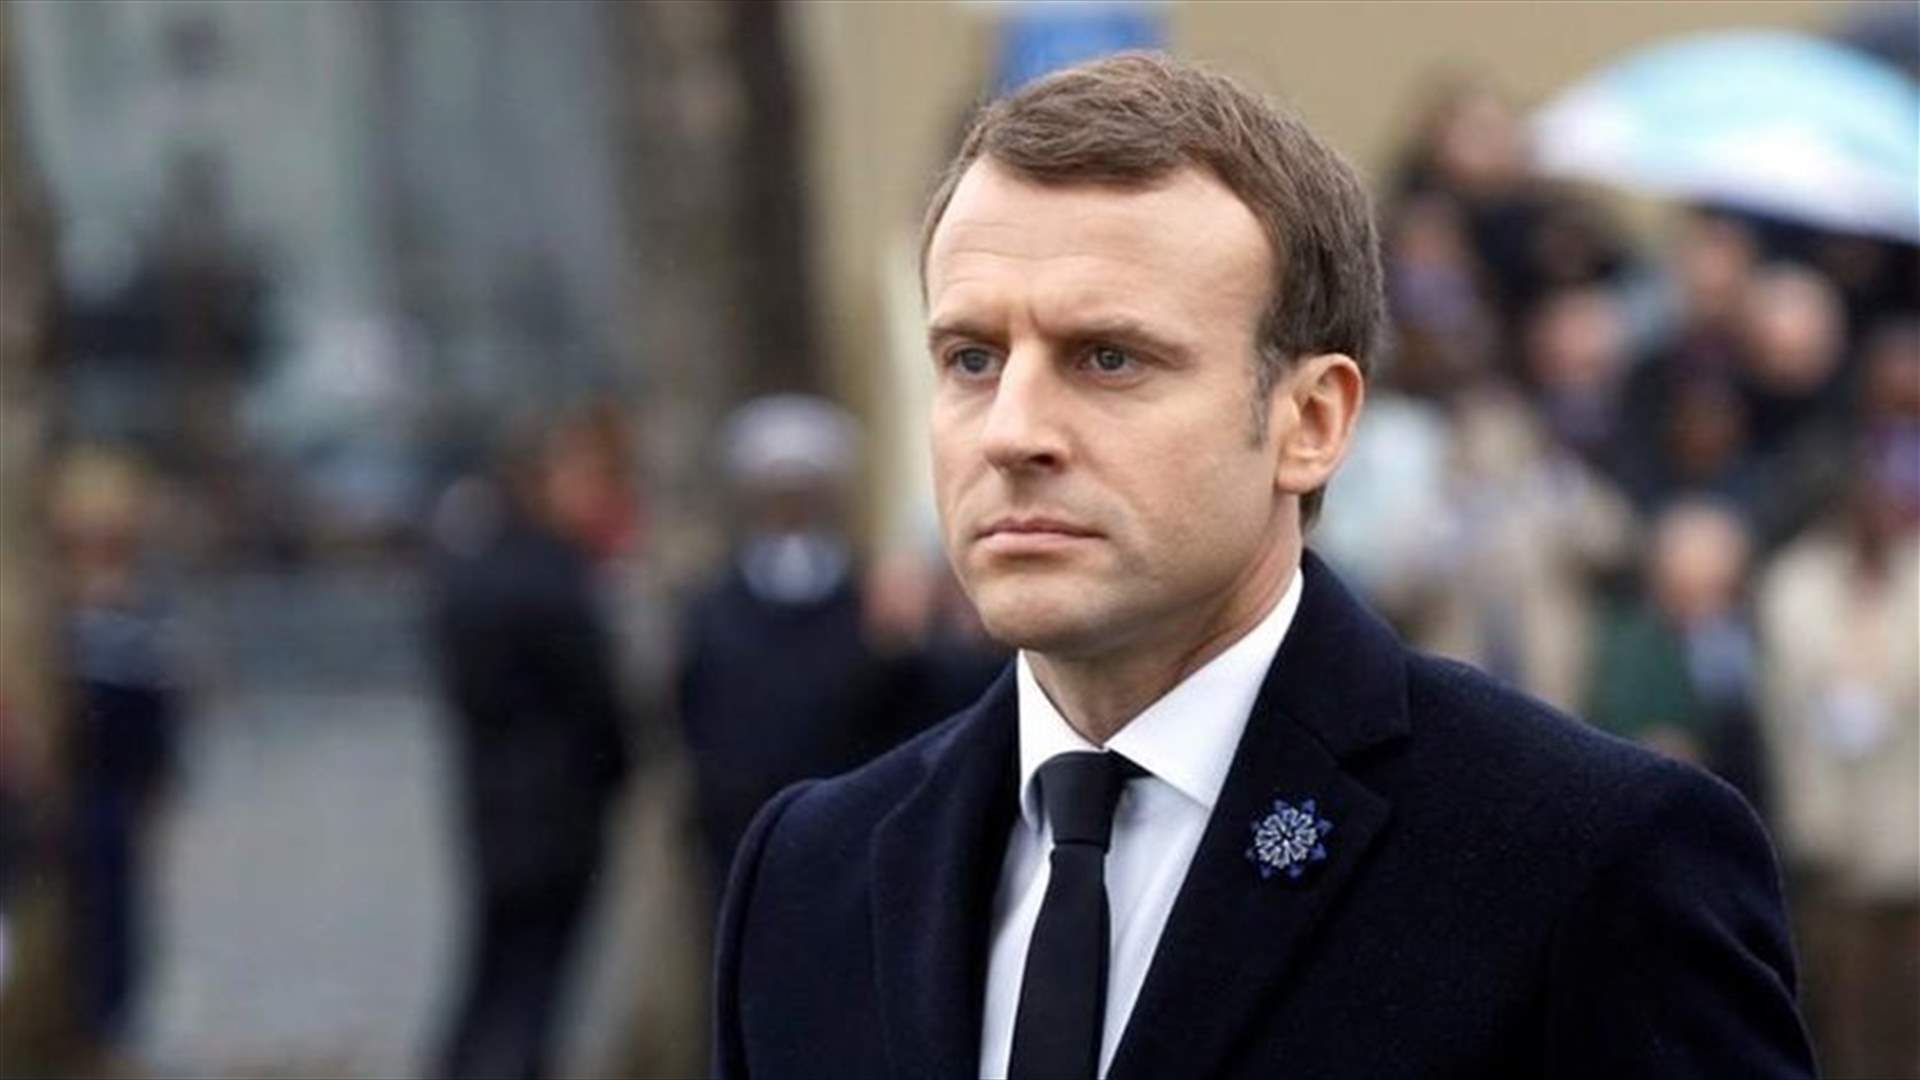 French President Macron&#39;s approval rating falls below 50 pct - Ifop